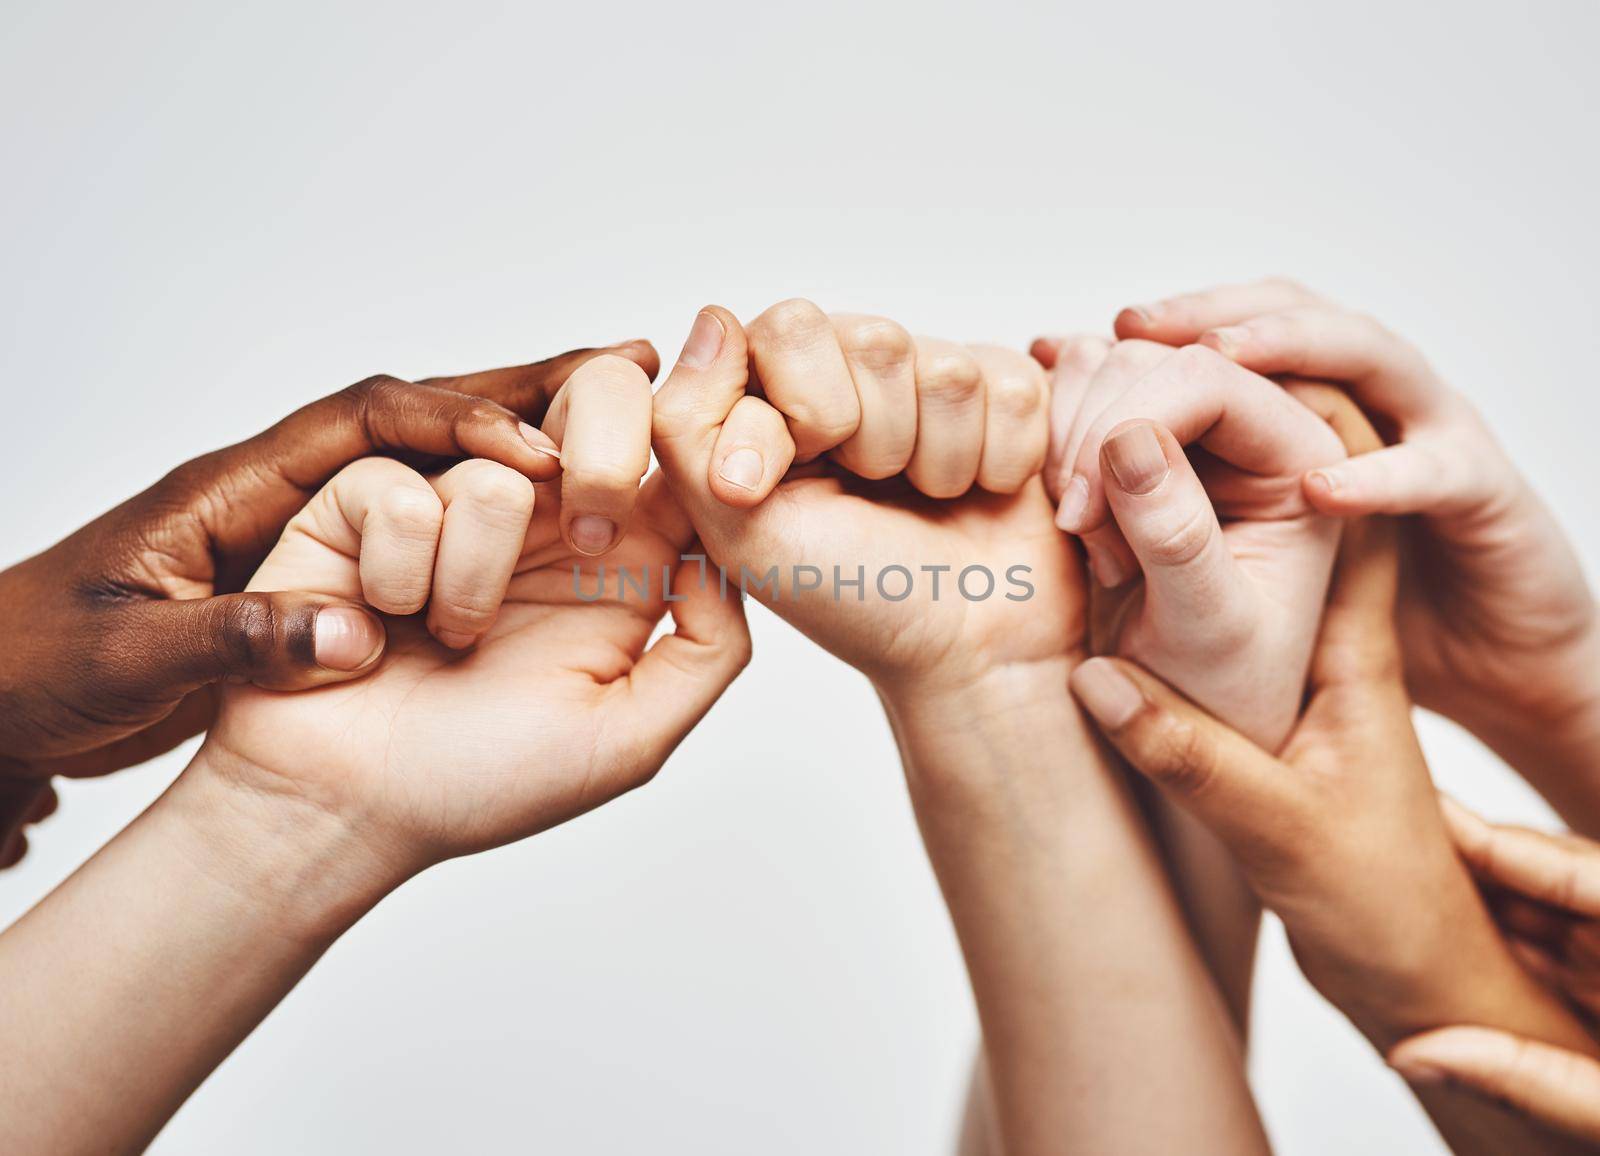 Hold on just a little longer. a group of hands holding onto each other against a white background. by YuriArcurs